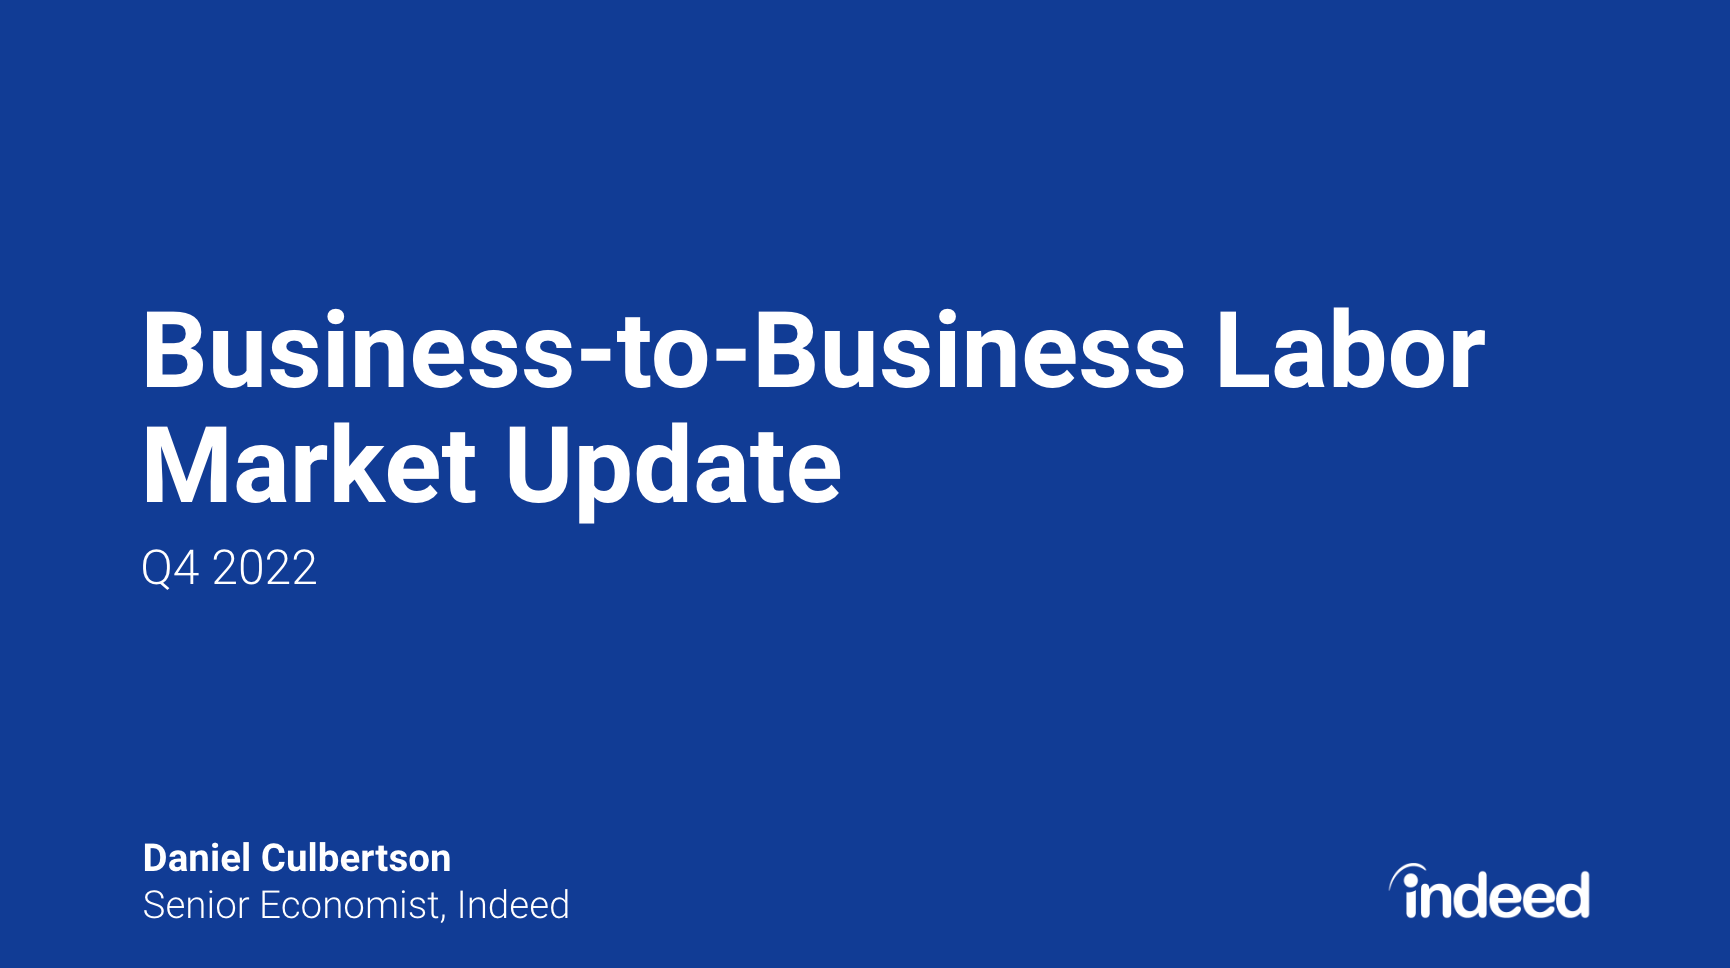 Business-to-Business Labor Market Update Q4 2022